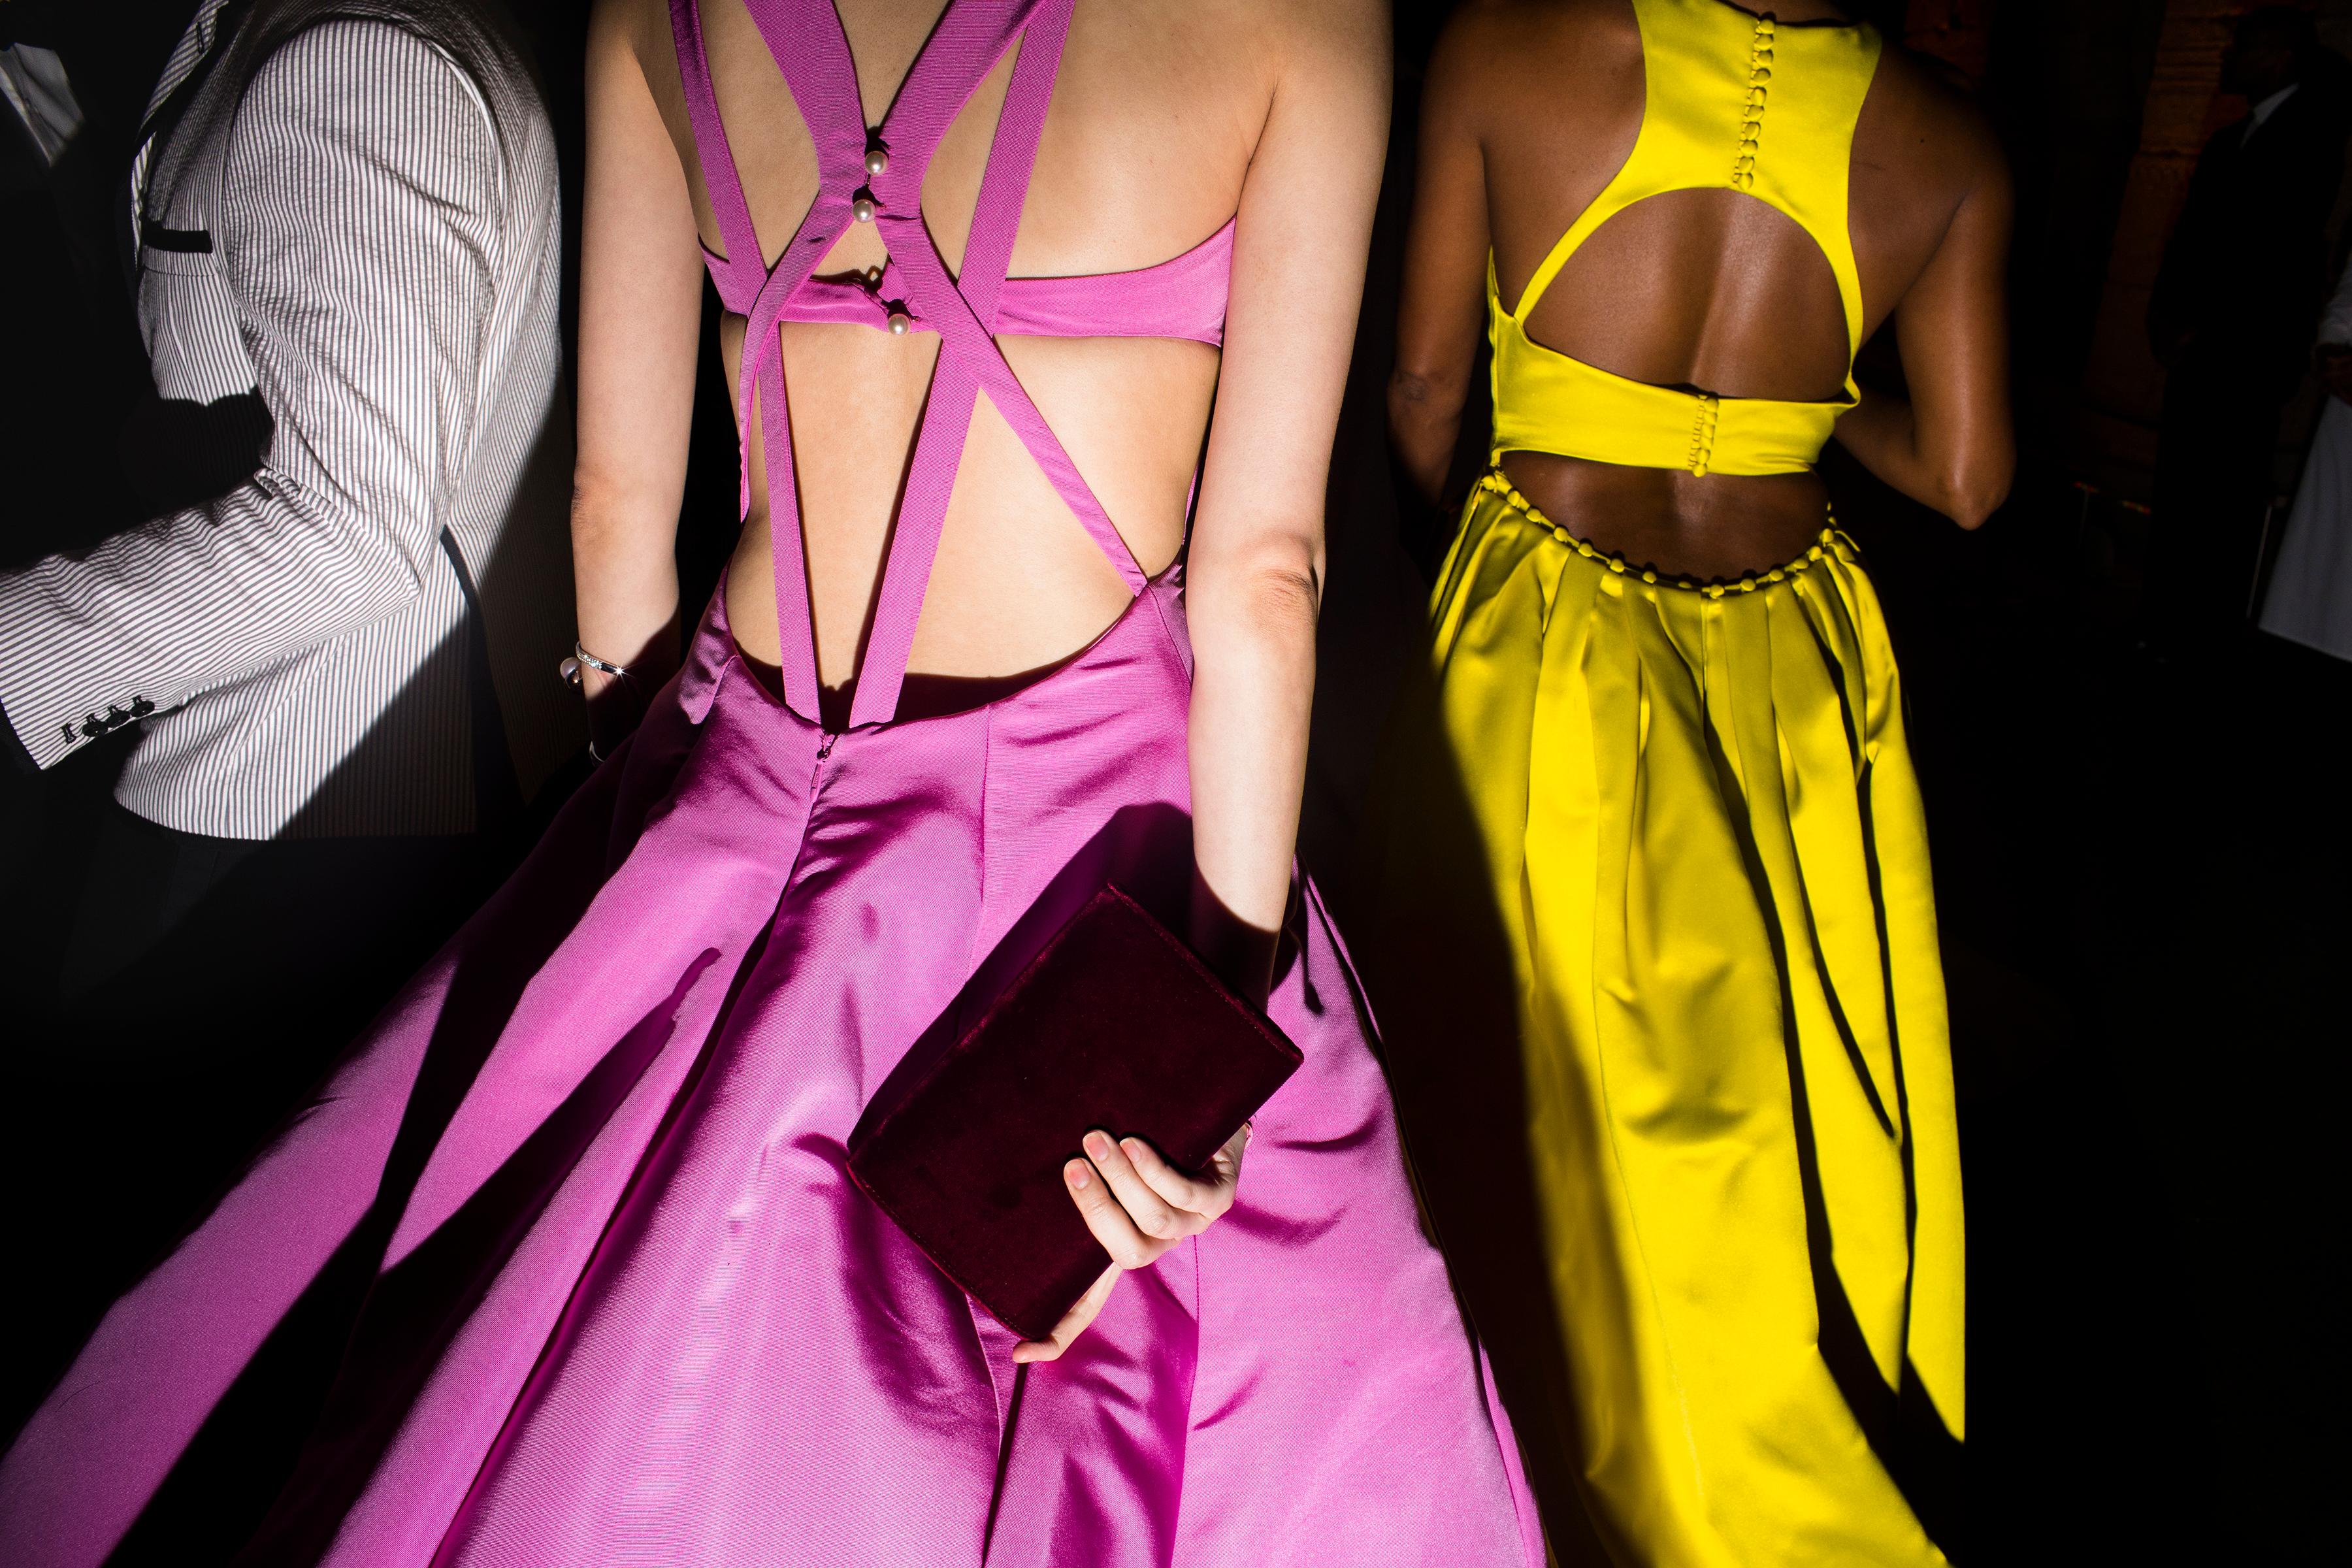 Landon Nordeman Figurative Photograph - "Leaving the Scene (Met Gala with Ming Xi & Gabrielle Union)" - Bold Abstract